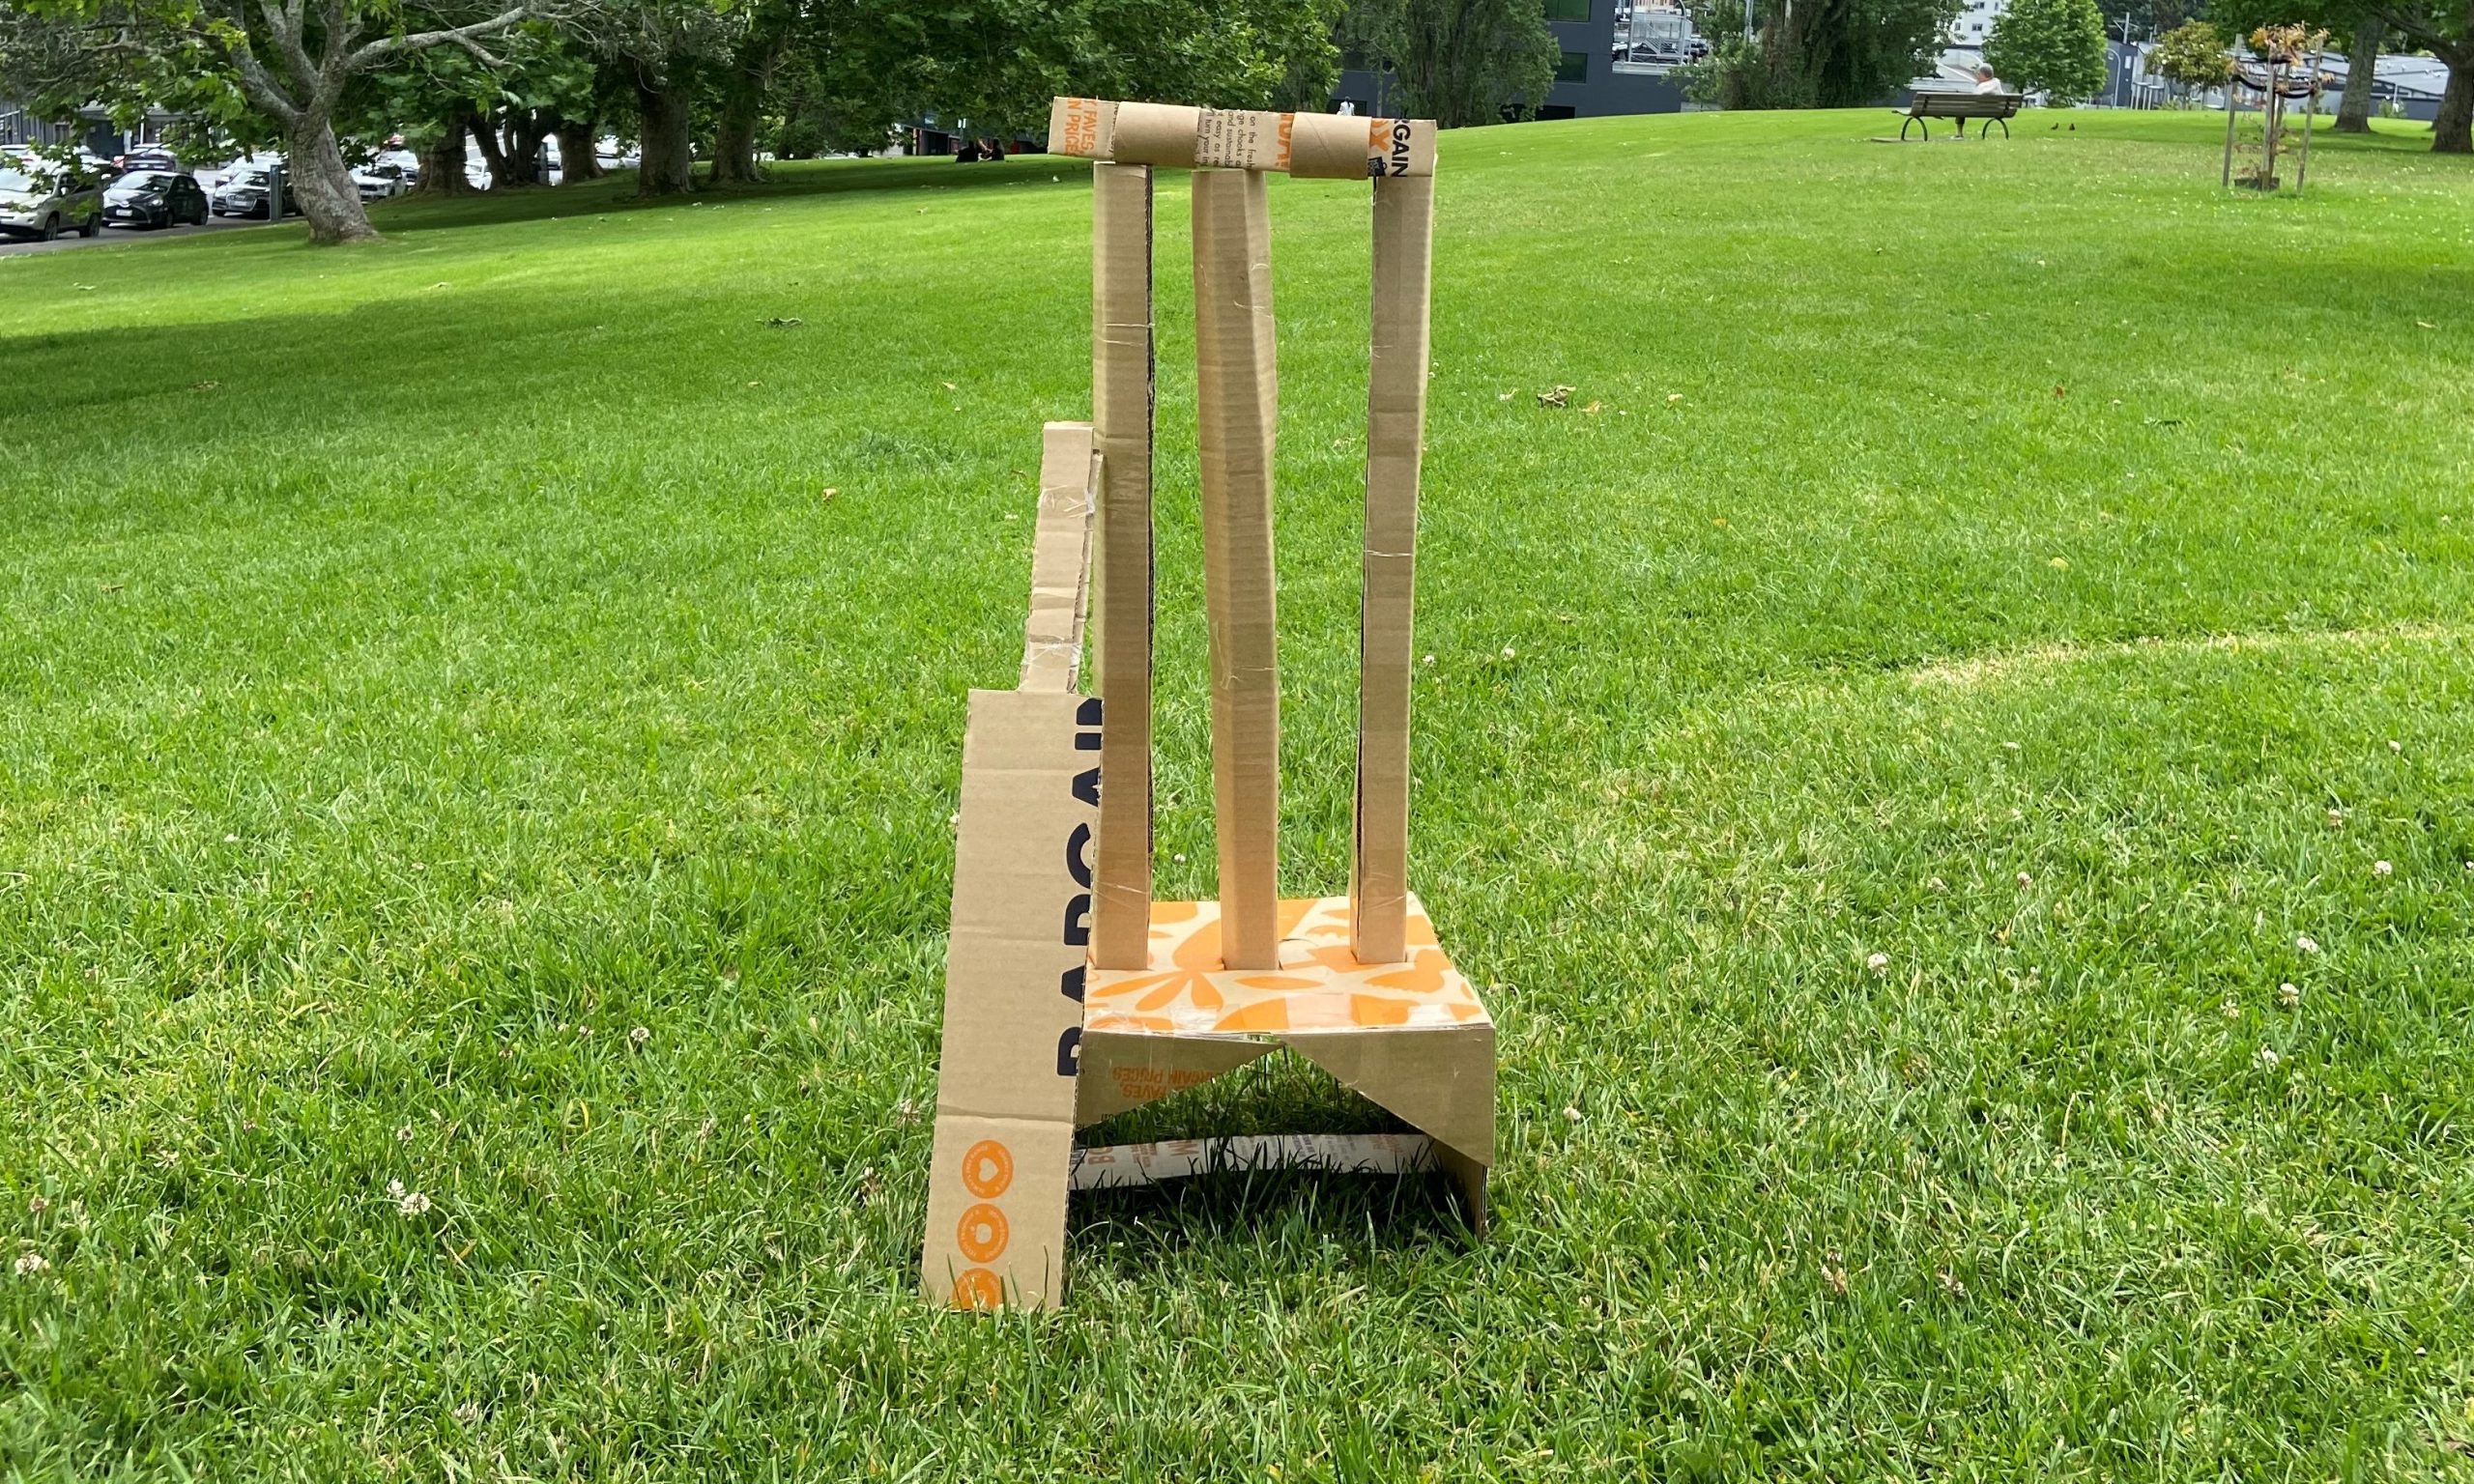 Cricket wickets made from a Bargain Box.